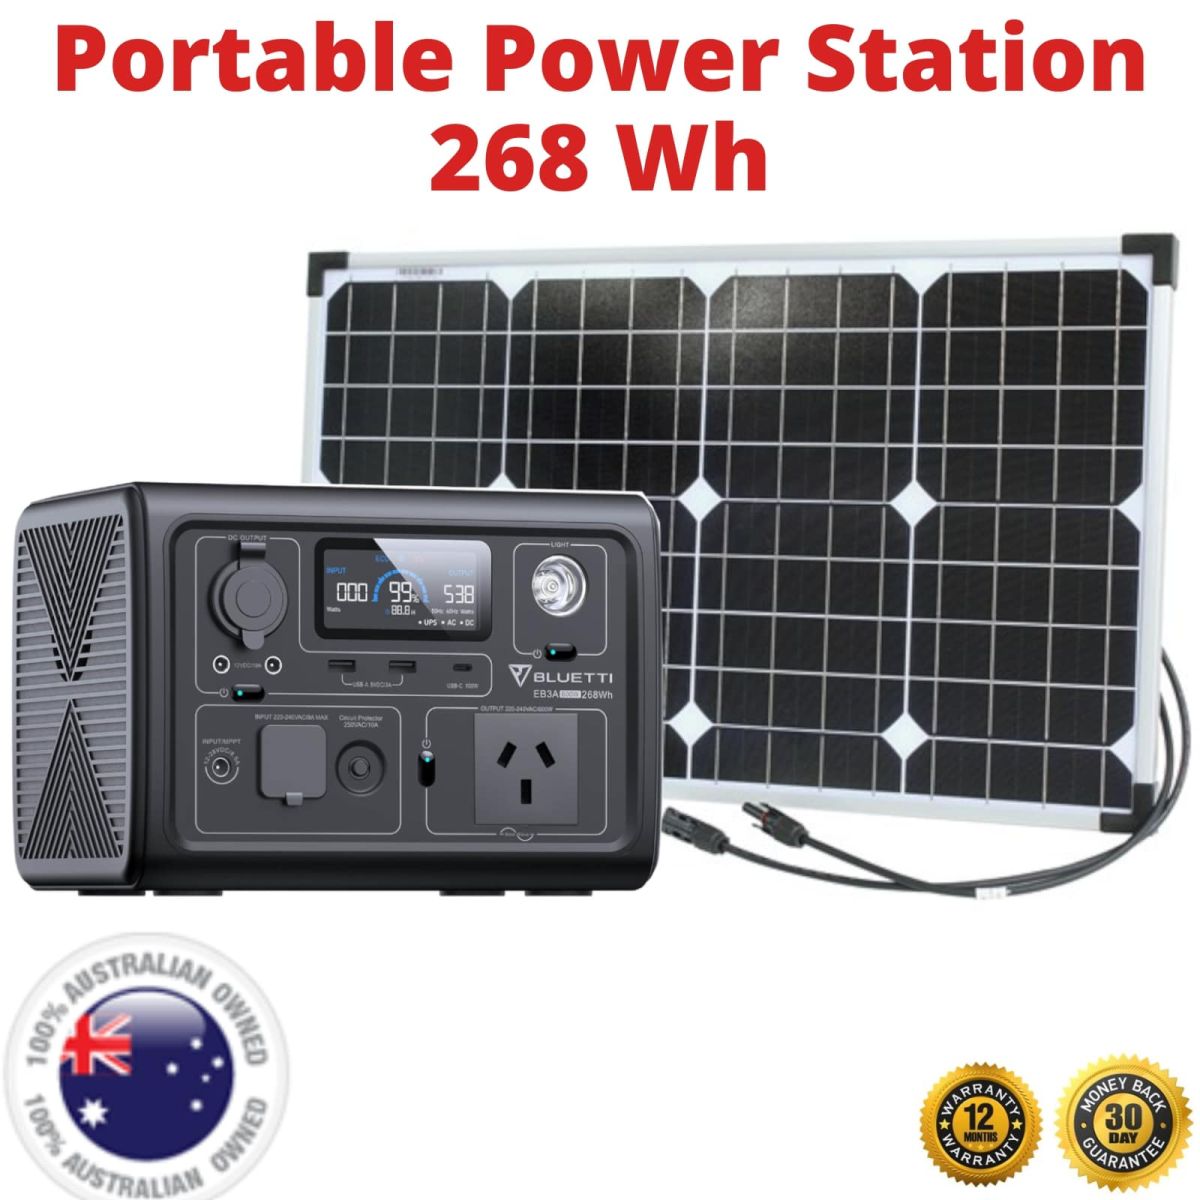 camping power station, portable Power station australia, lithium portable Power station, best portable Power station australia